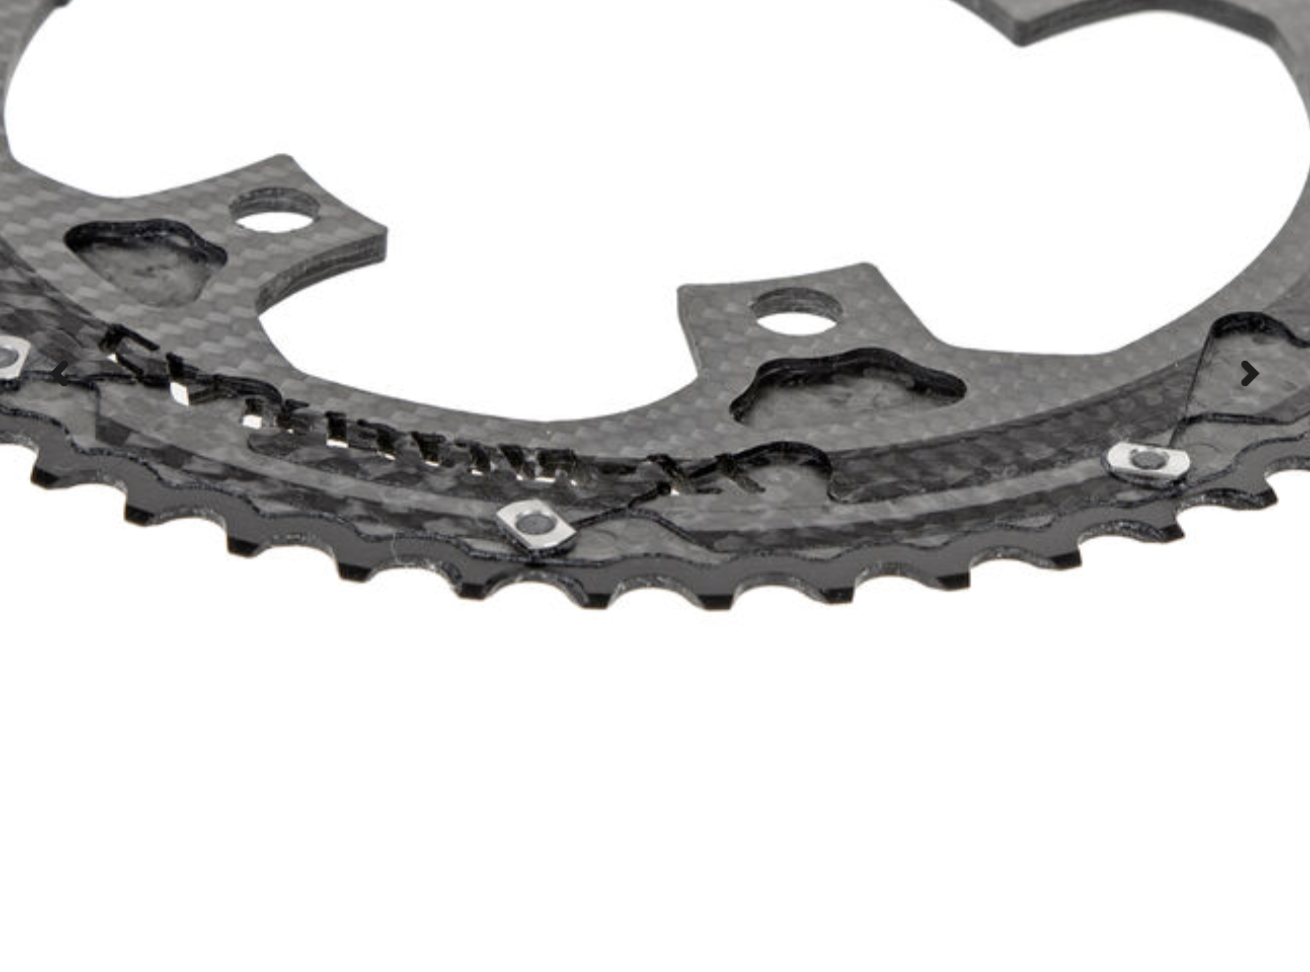 CARBON TI CHAINRING OUTER 5 ARMS CYCLING SYDNEY AUSTRALIA BIKE SHOP